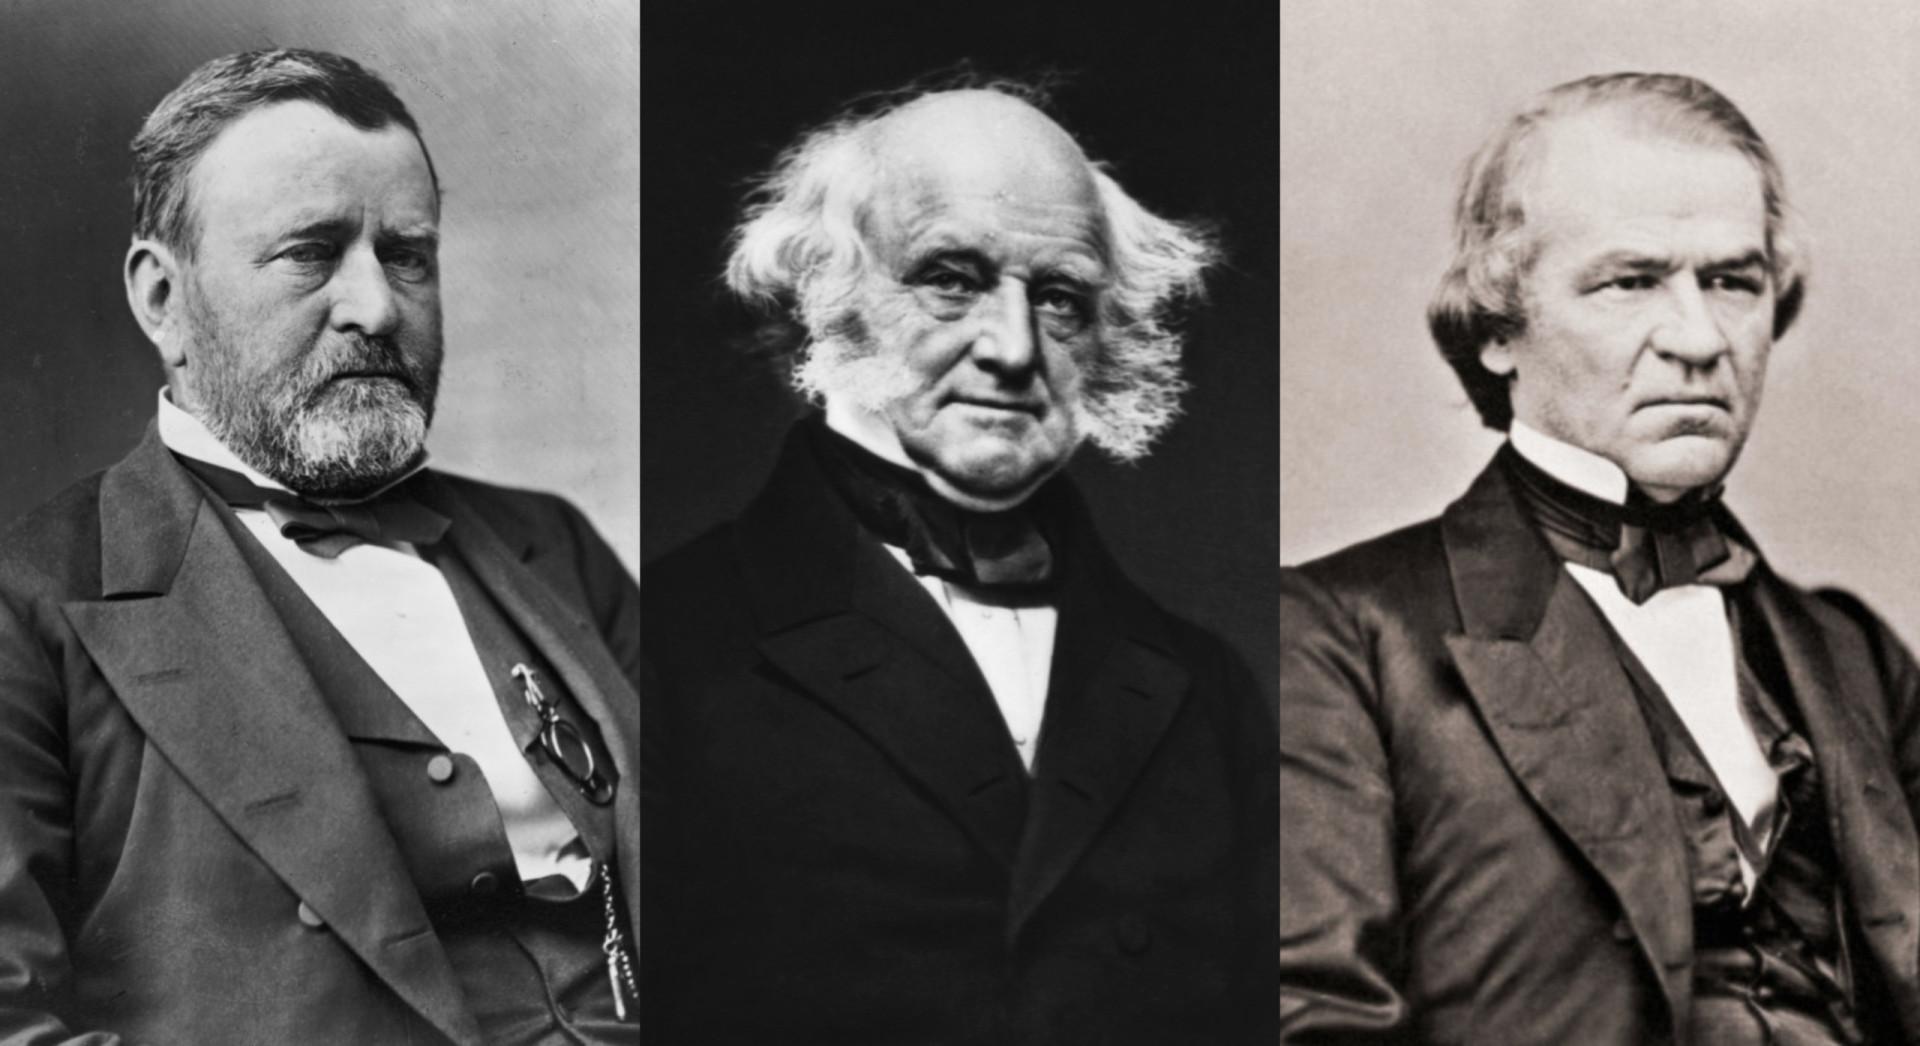 A dark history of American presidents who owned slaves